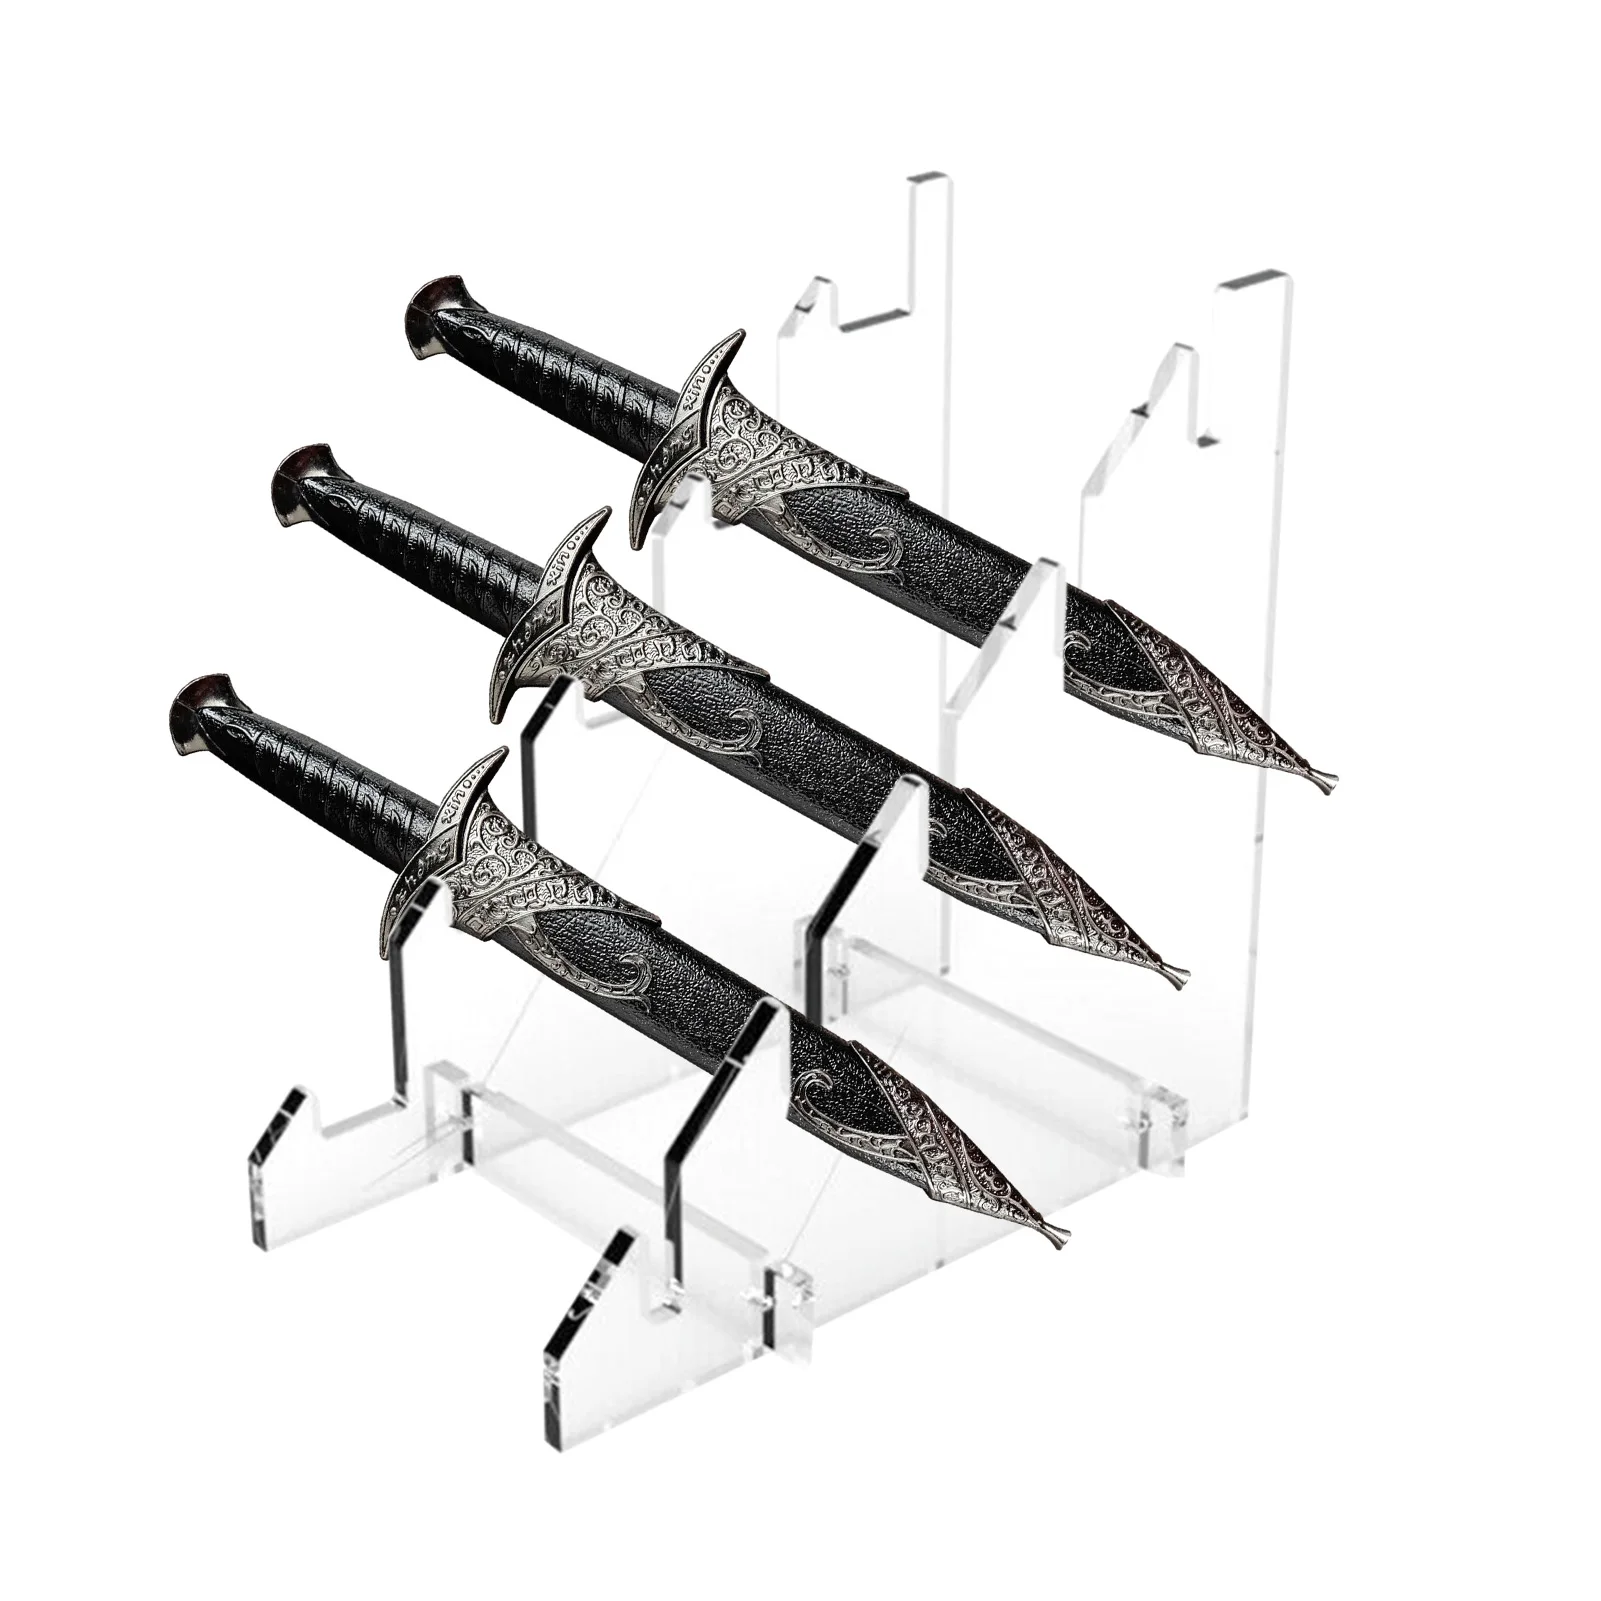 https://ae01.alicdn.com/kf/Sd802cff980b741f9be4db94a4dda12601/Acrylic-Knives-Display-Stand-Plate-5-Slot-Clear-Display-Stand-Rack-For-Knives-Gifts-For-Men.jpg